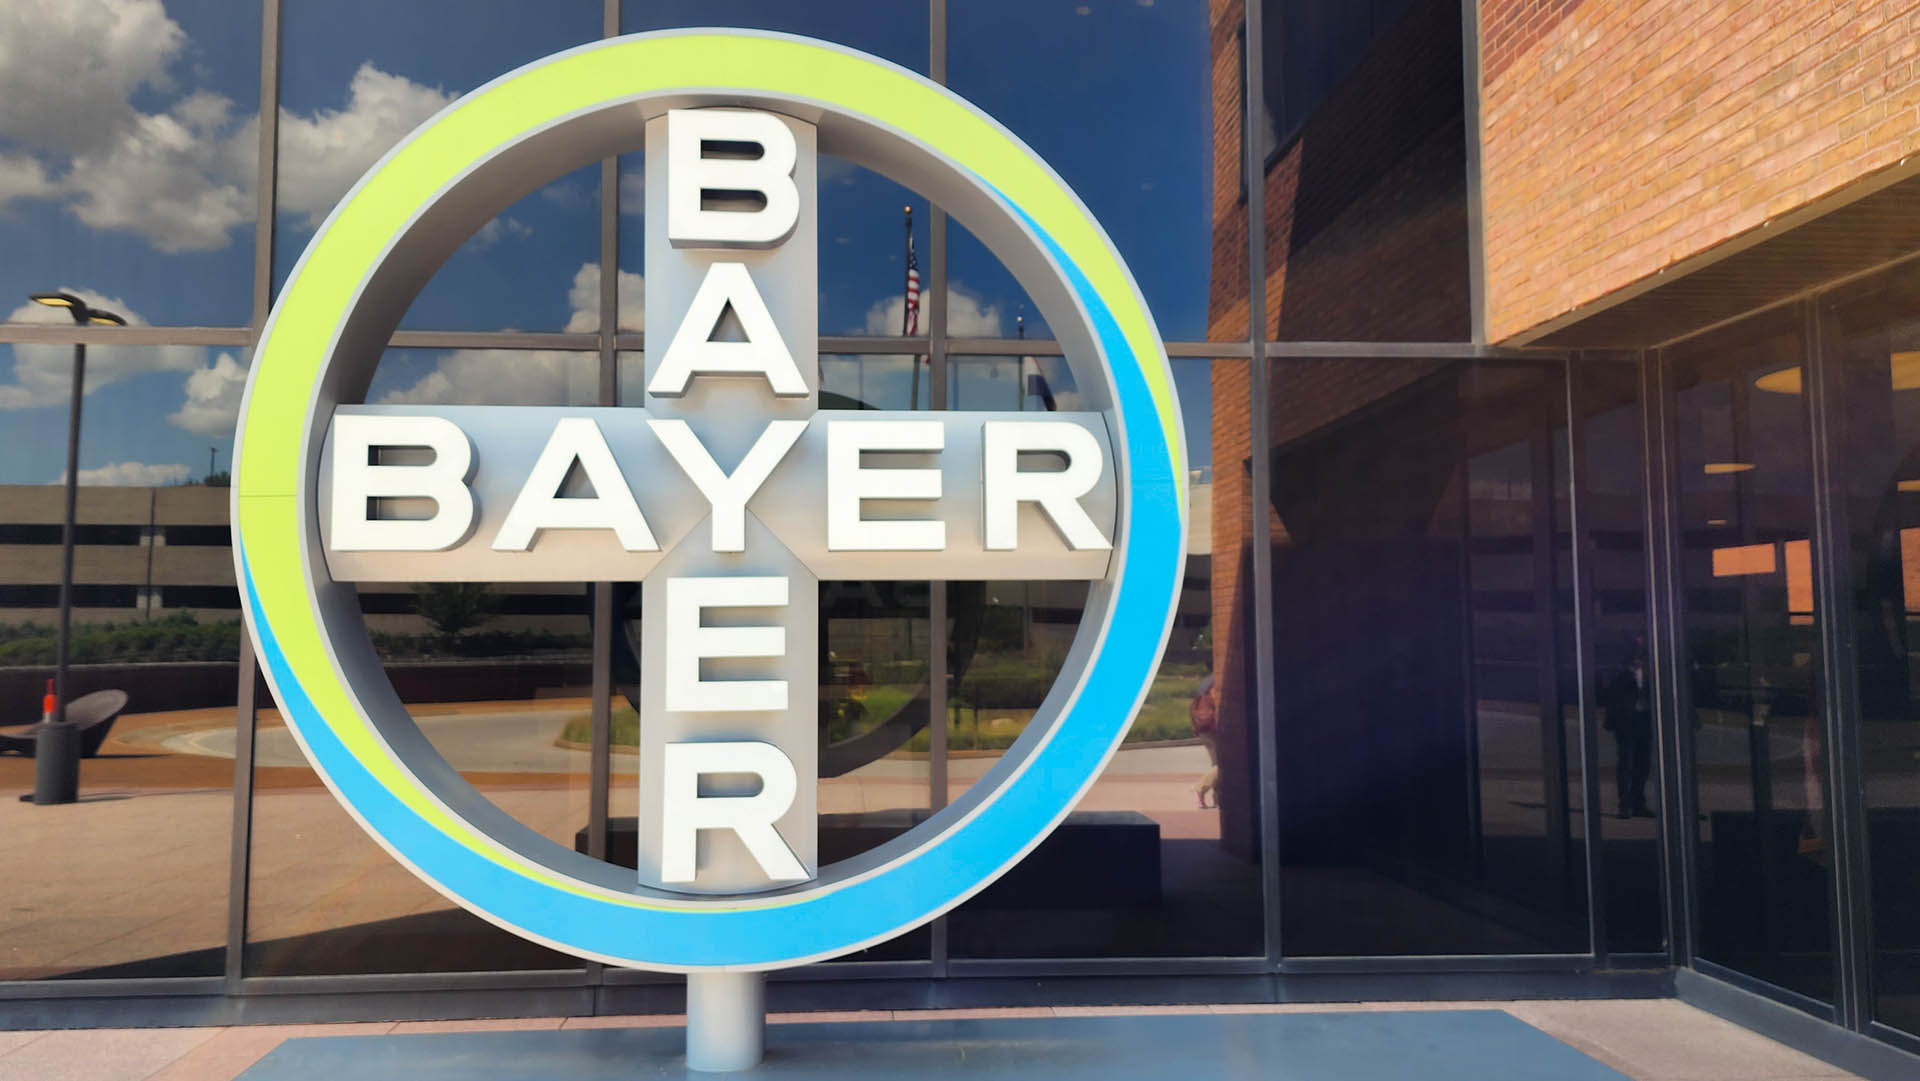 Bayer in St. Louis